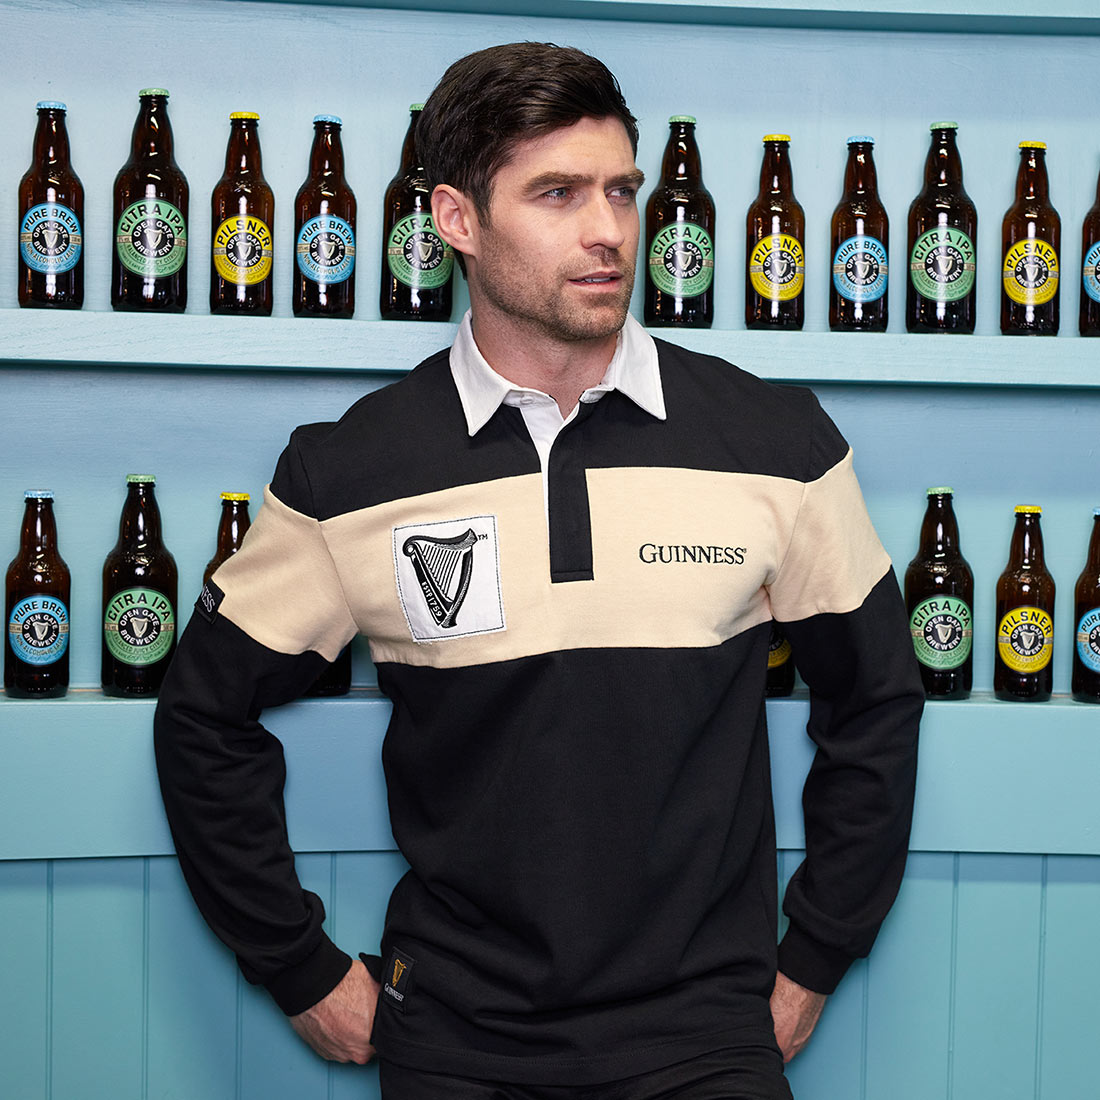 A man, wearing a Traditional Rugby Jersey with Cream panel and Harp logo patch, is leaning against a wall of beer bottles with prominent Guinness branding and the Harp logo.